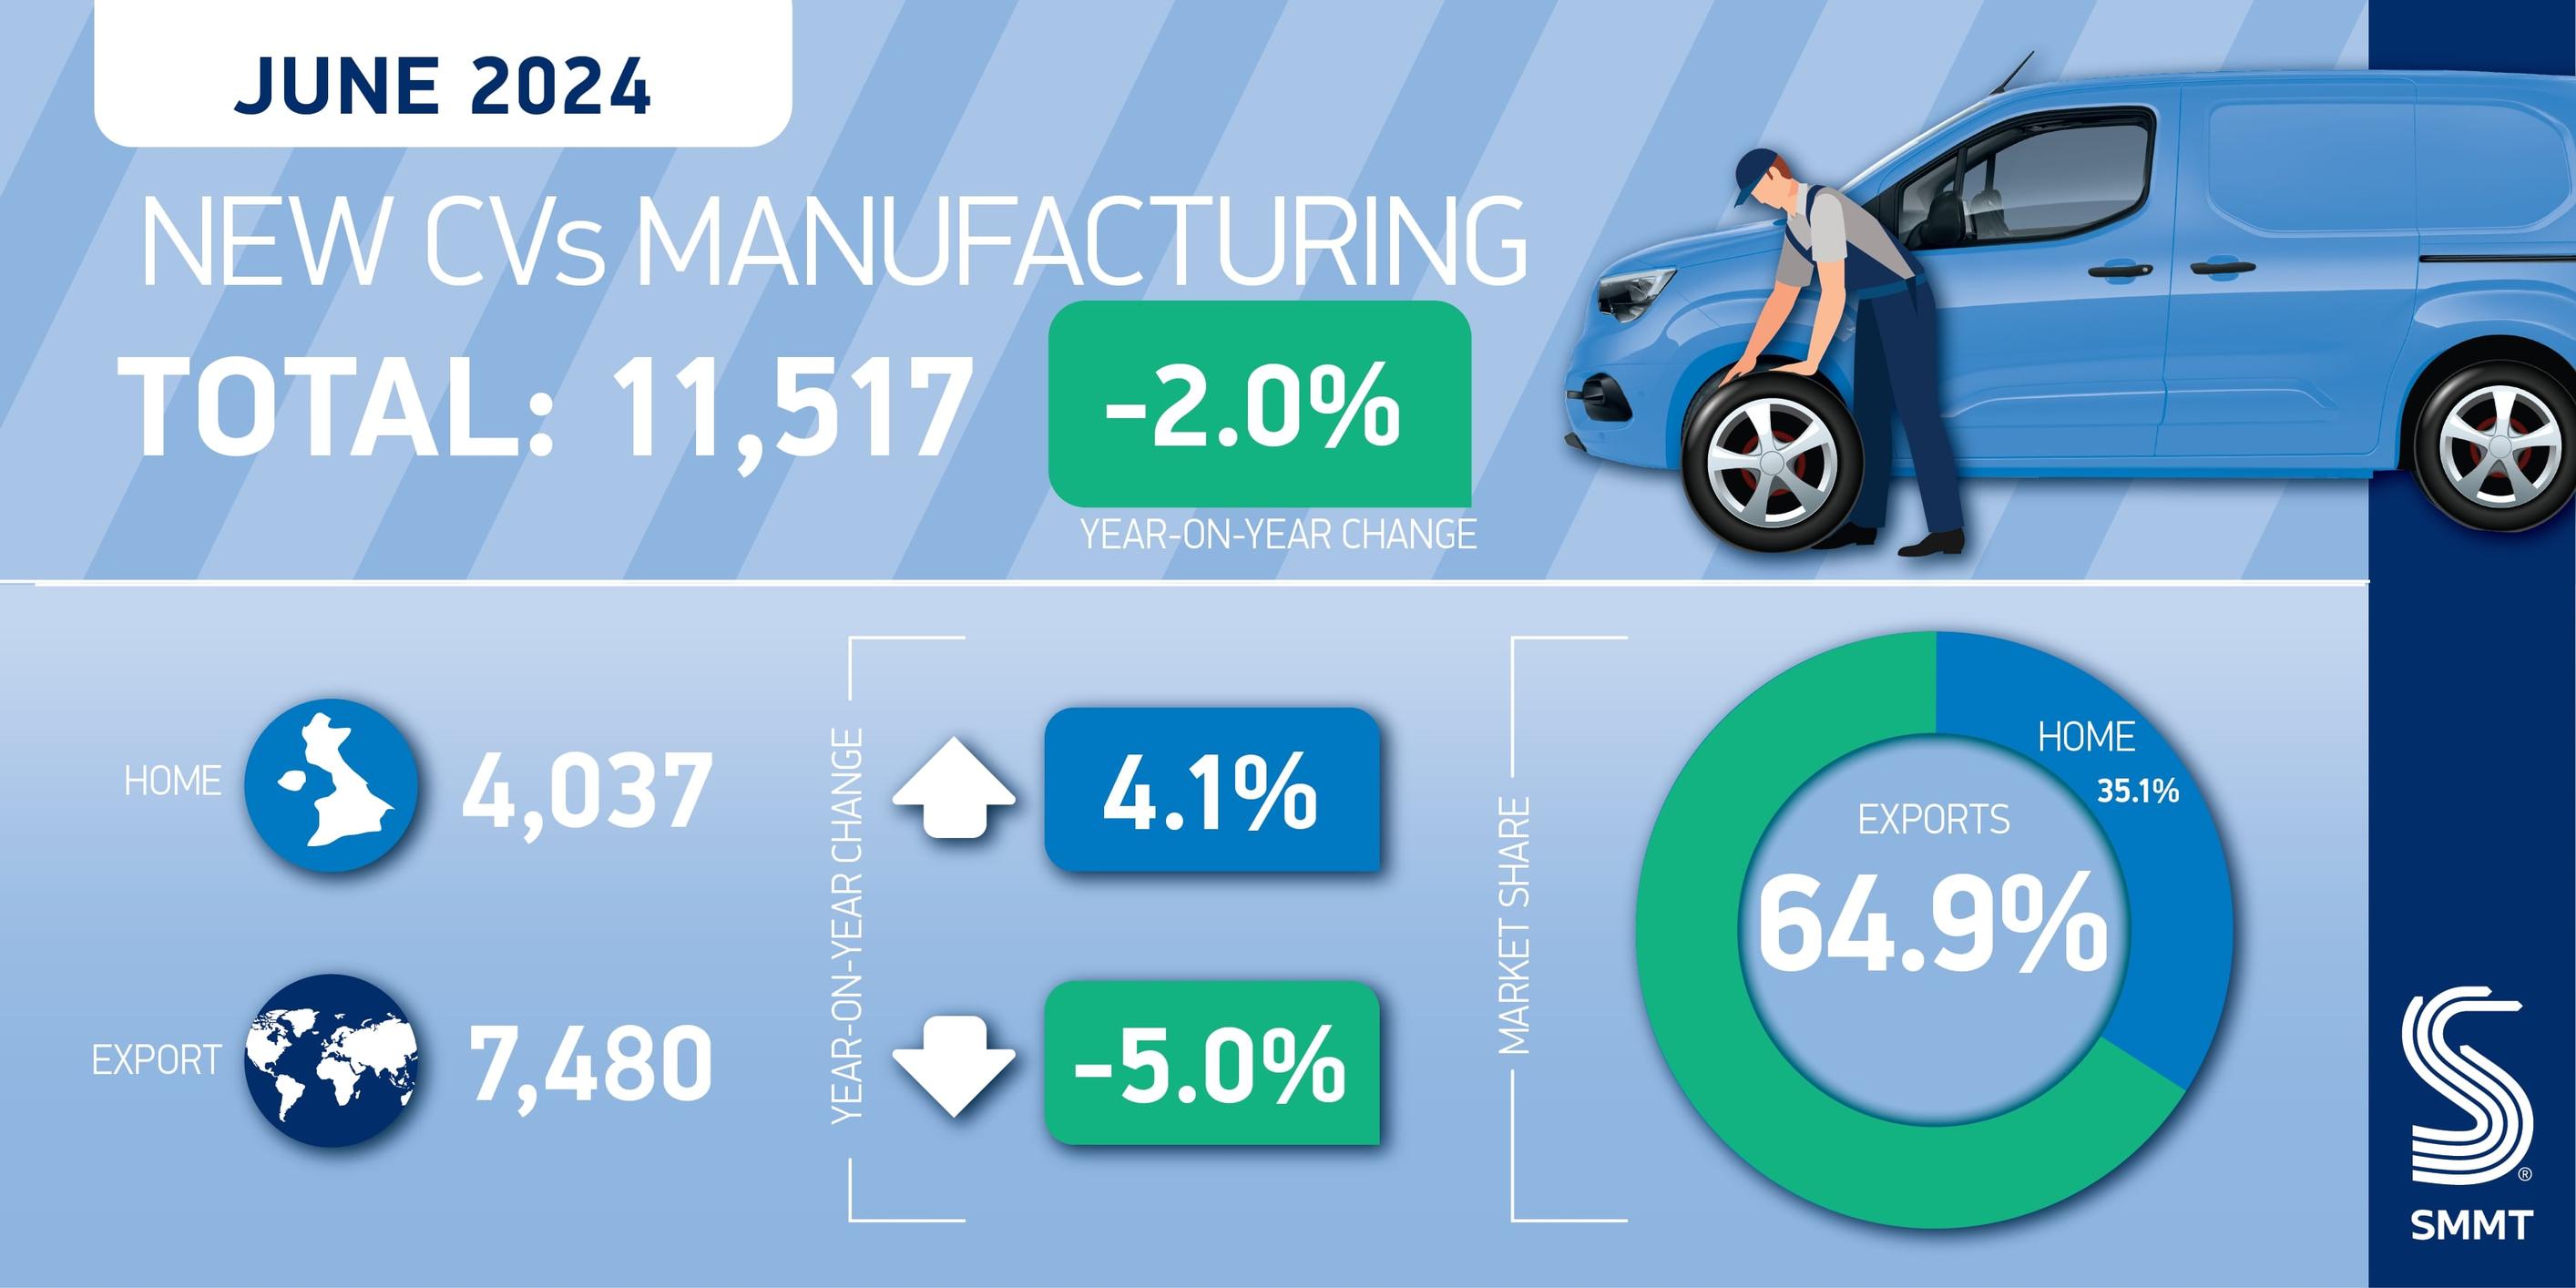 UK commercial vehicle production strong despite fall in domestic market